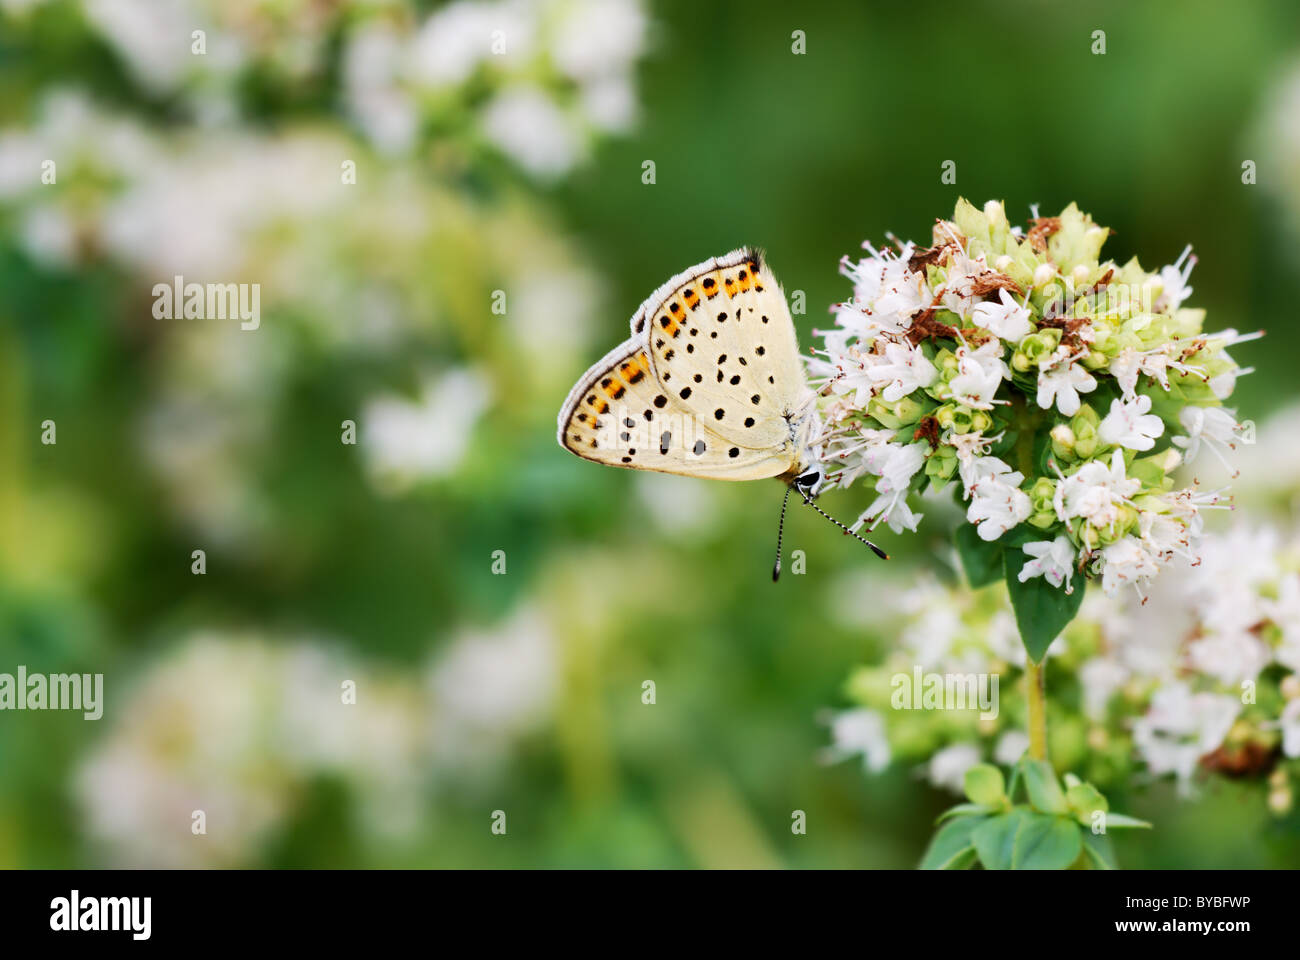 Oregano flowers with small butterfly Stock Photo